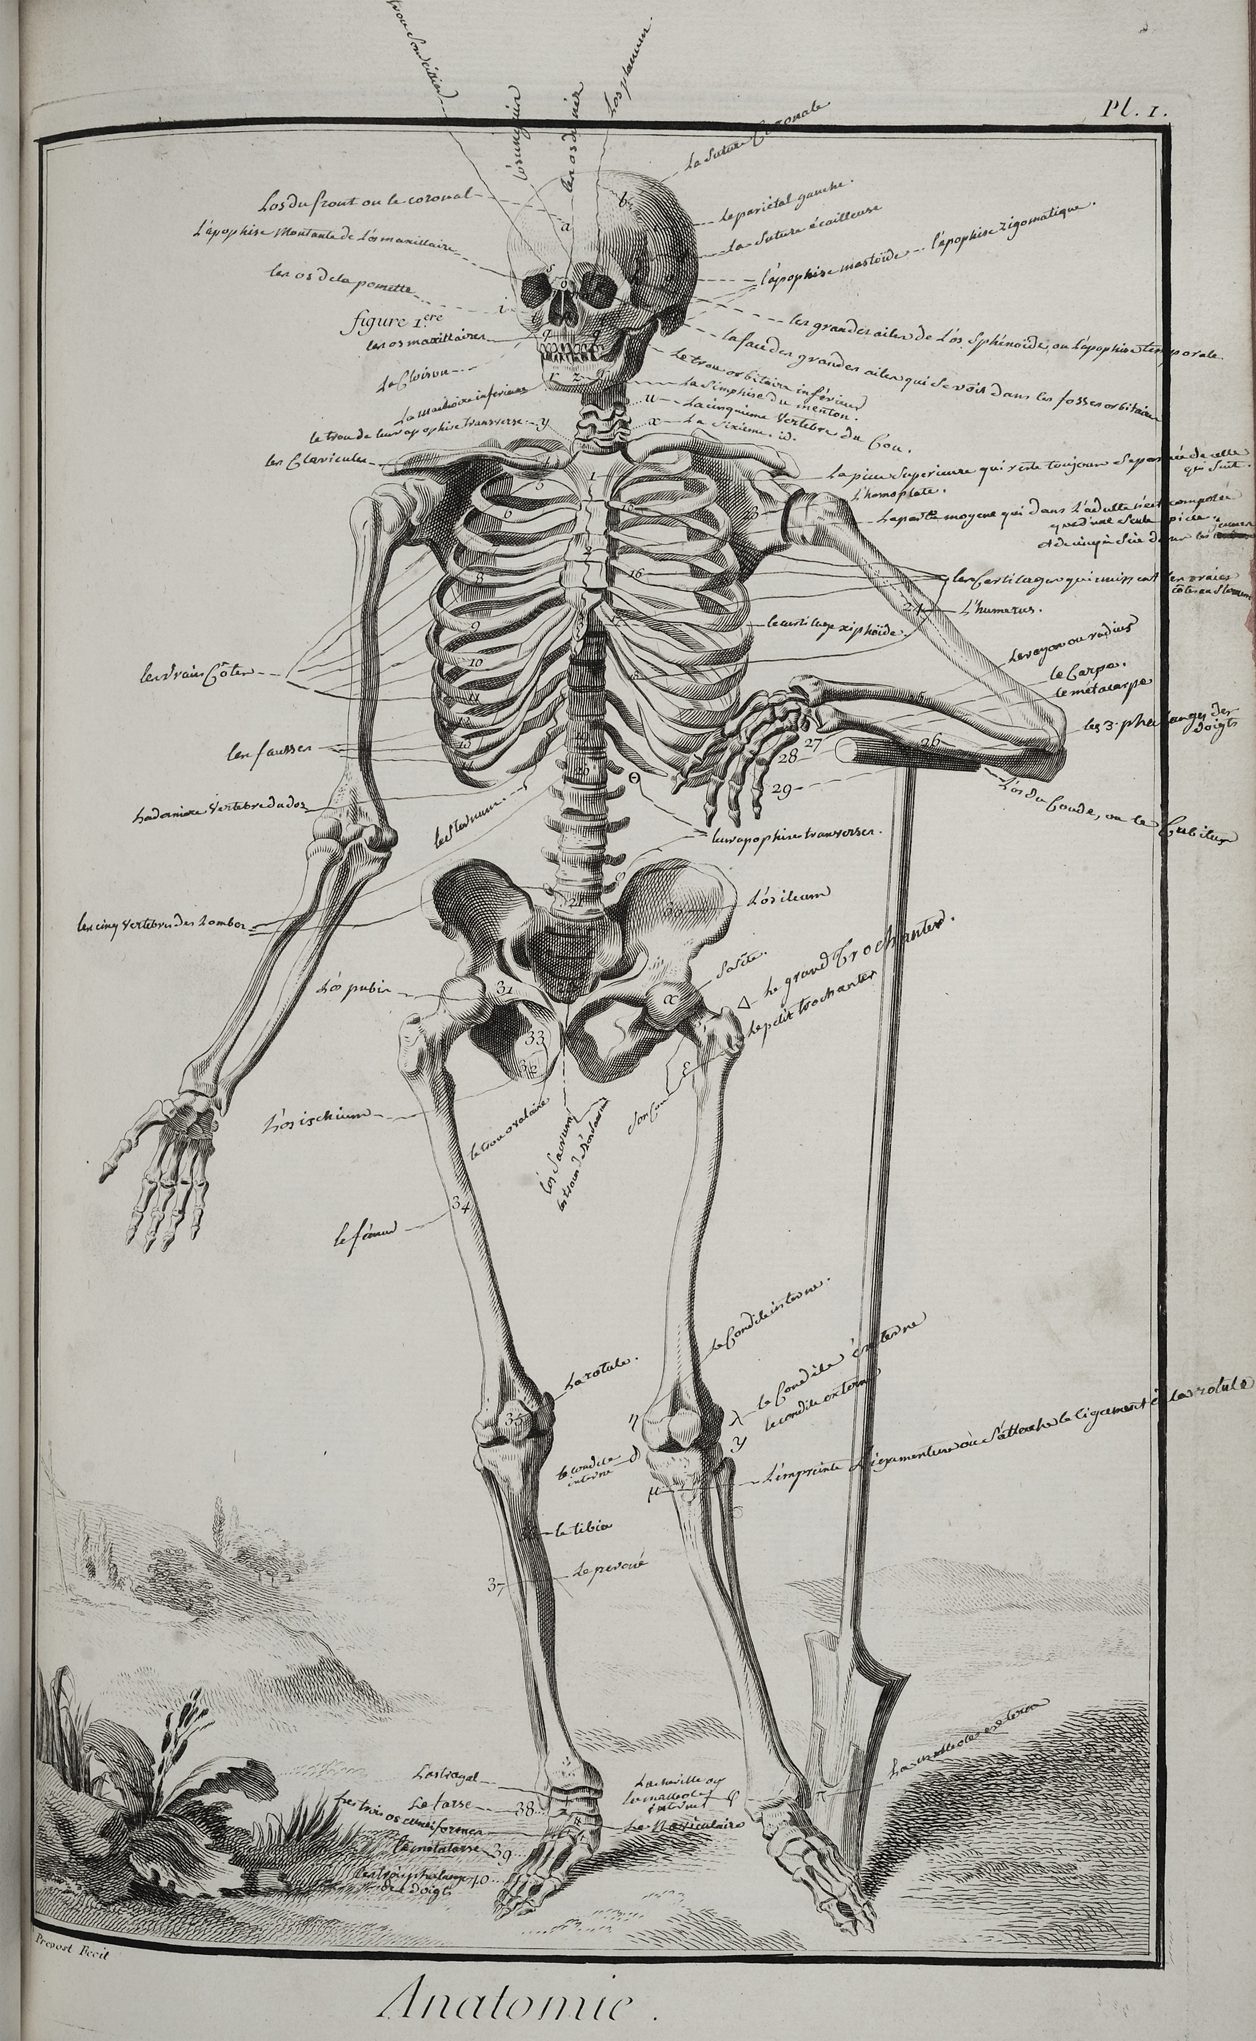 A plate from Diderot's Encyclopédie entitled Anatomie that shows an annotated image of a skeleton